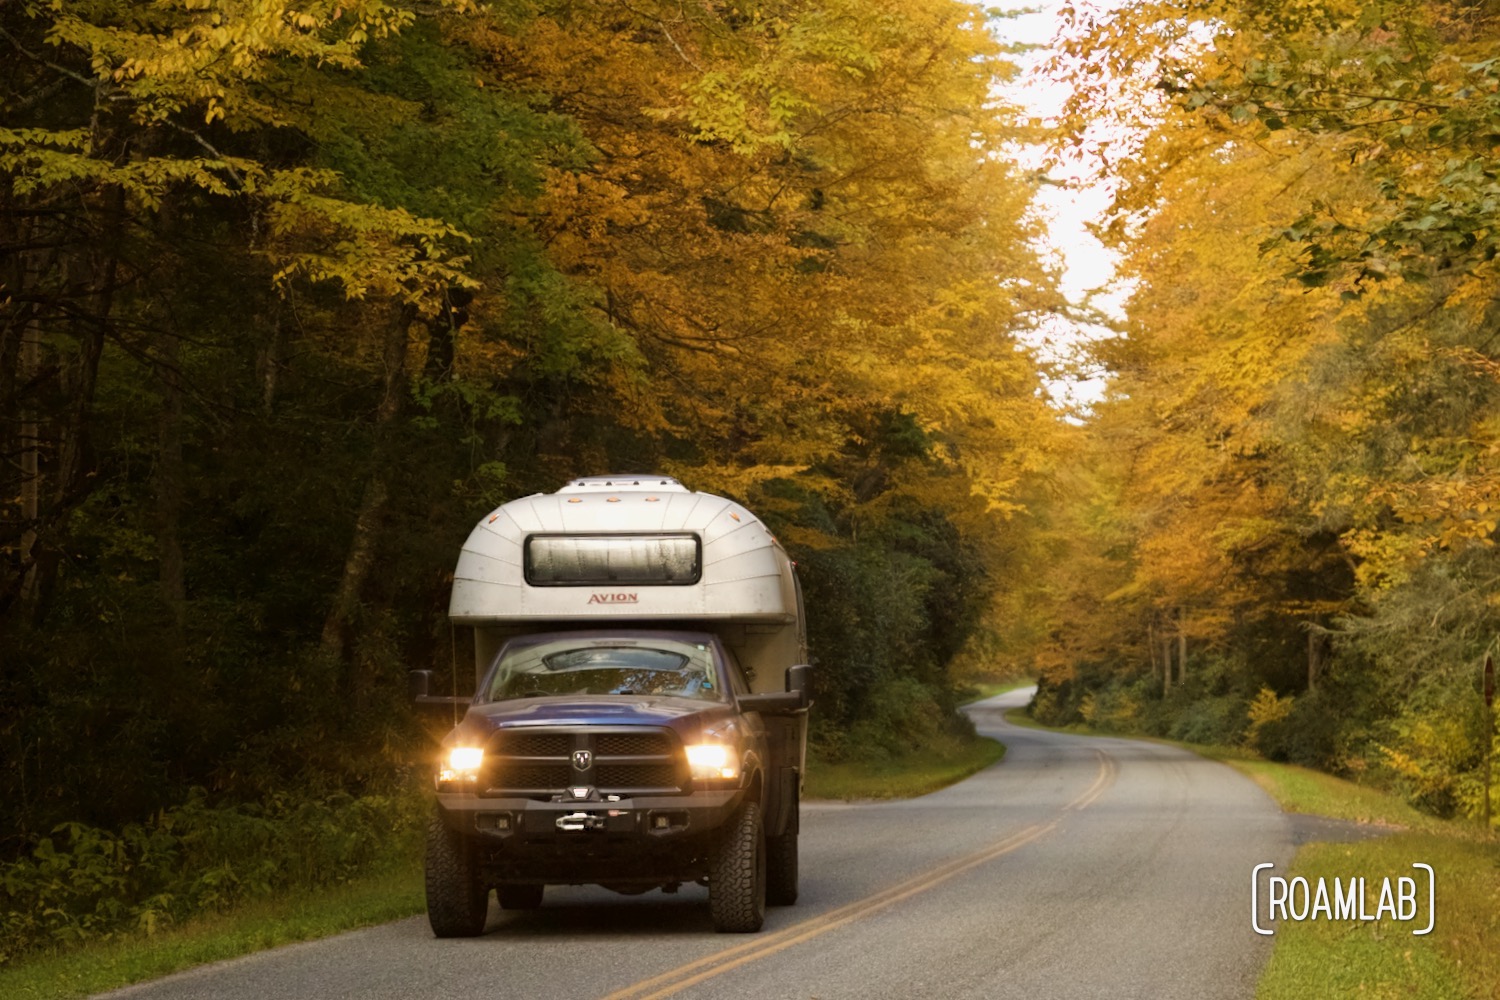 1970 Avion C11 truck camper surrounded by golden trees along Blue Ridge Parkway.